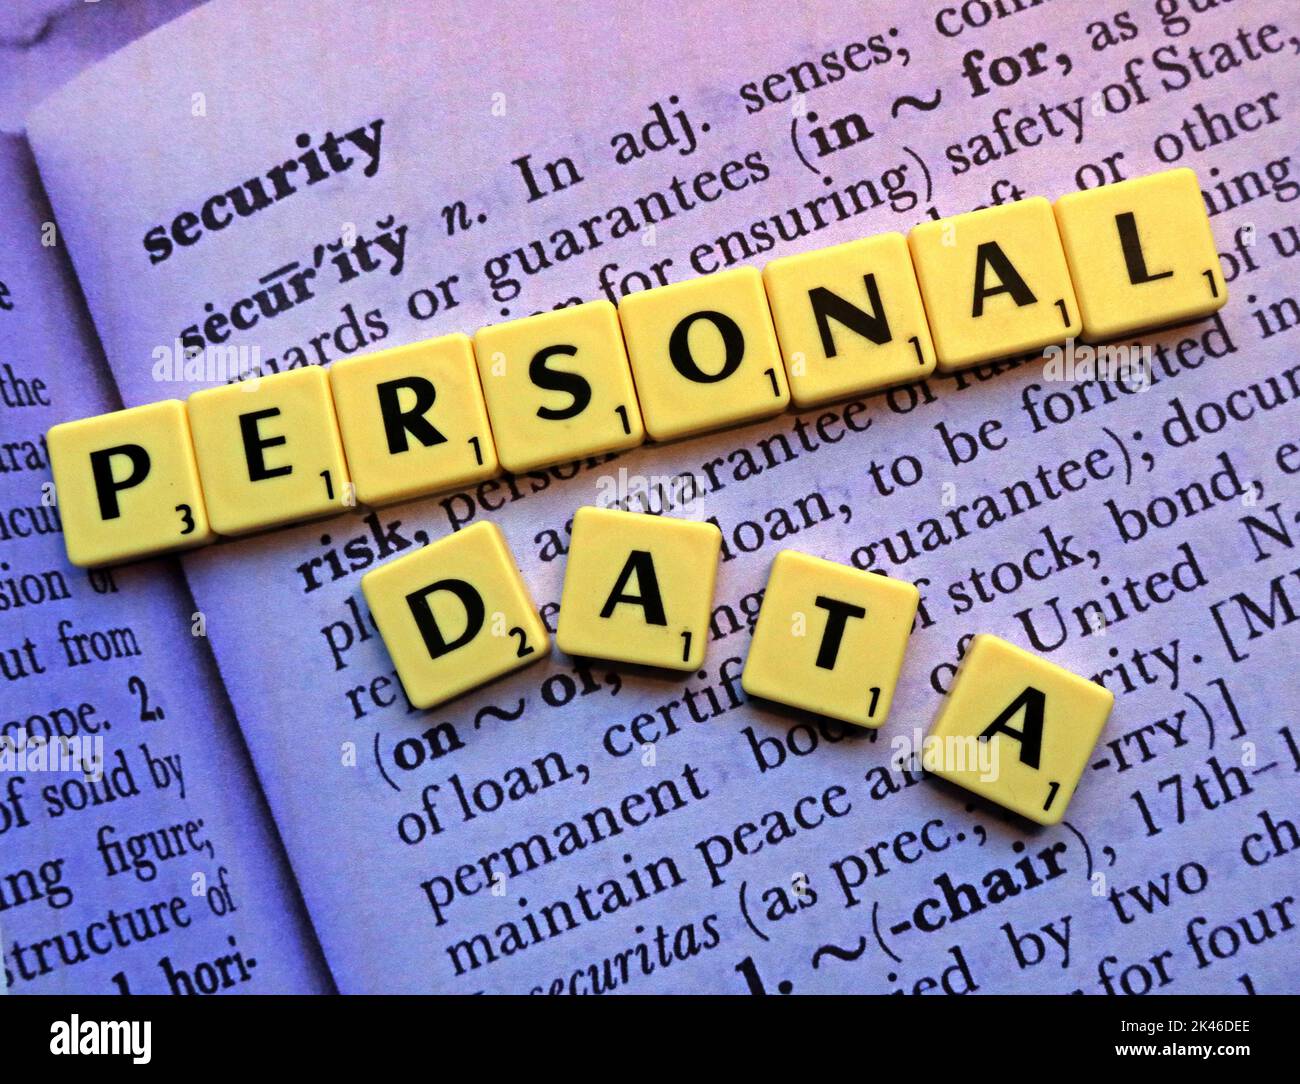 Personal Data,spelled out in Scrabble letters, on the dictionary definition of security Stock Photo